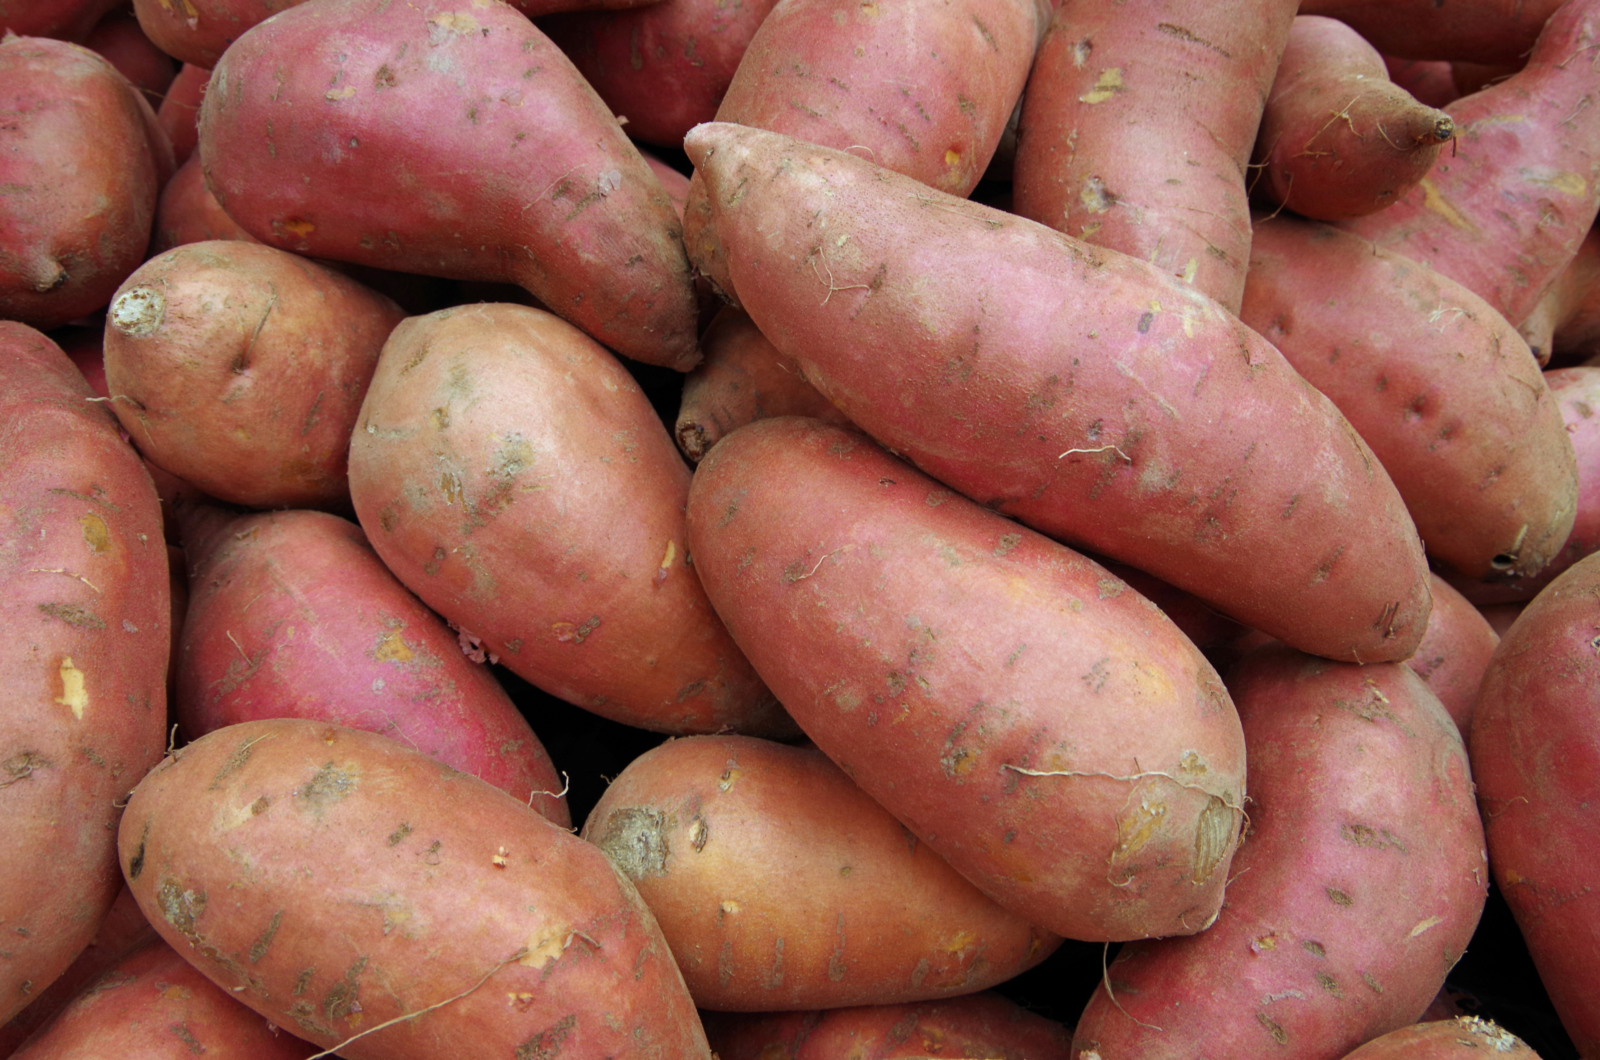 A pile of orange-pink sweet potatoes of various shapes